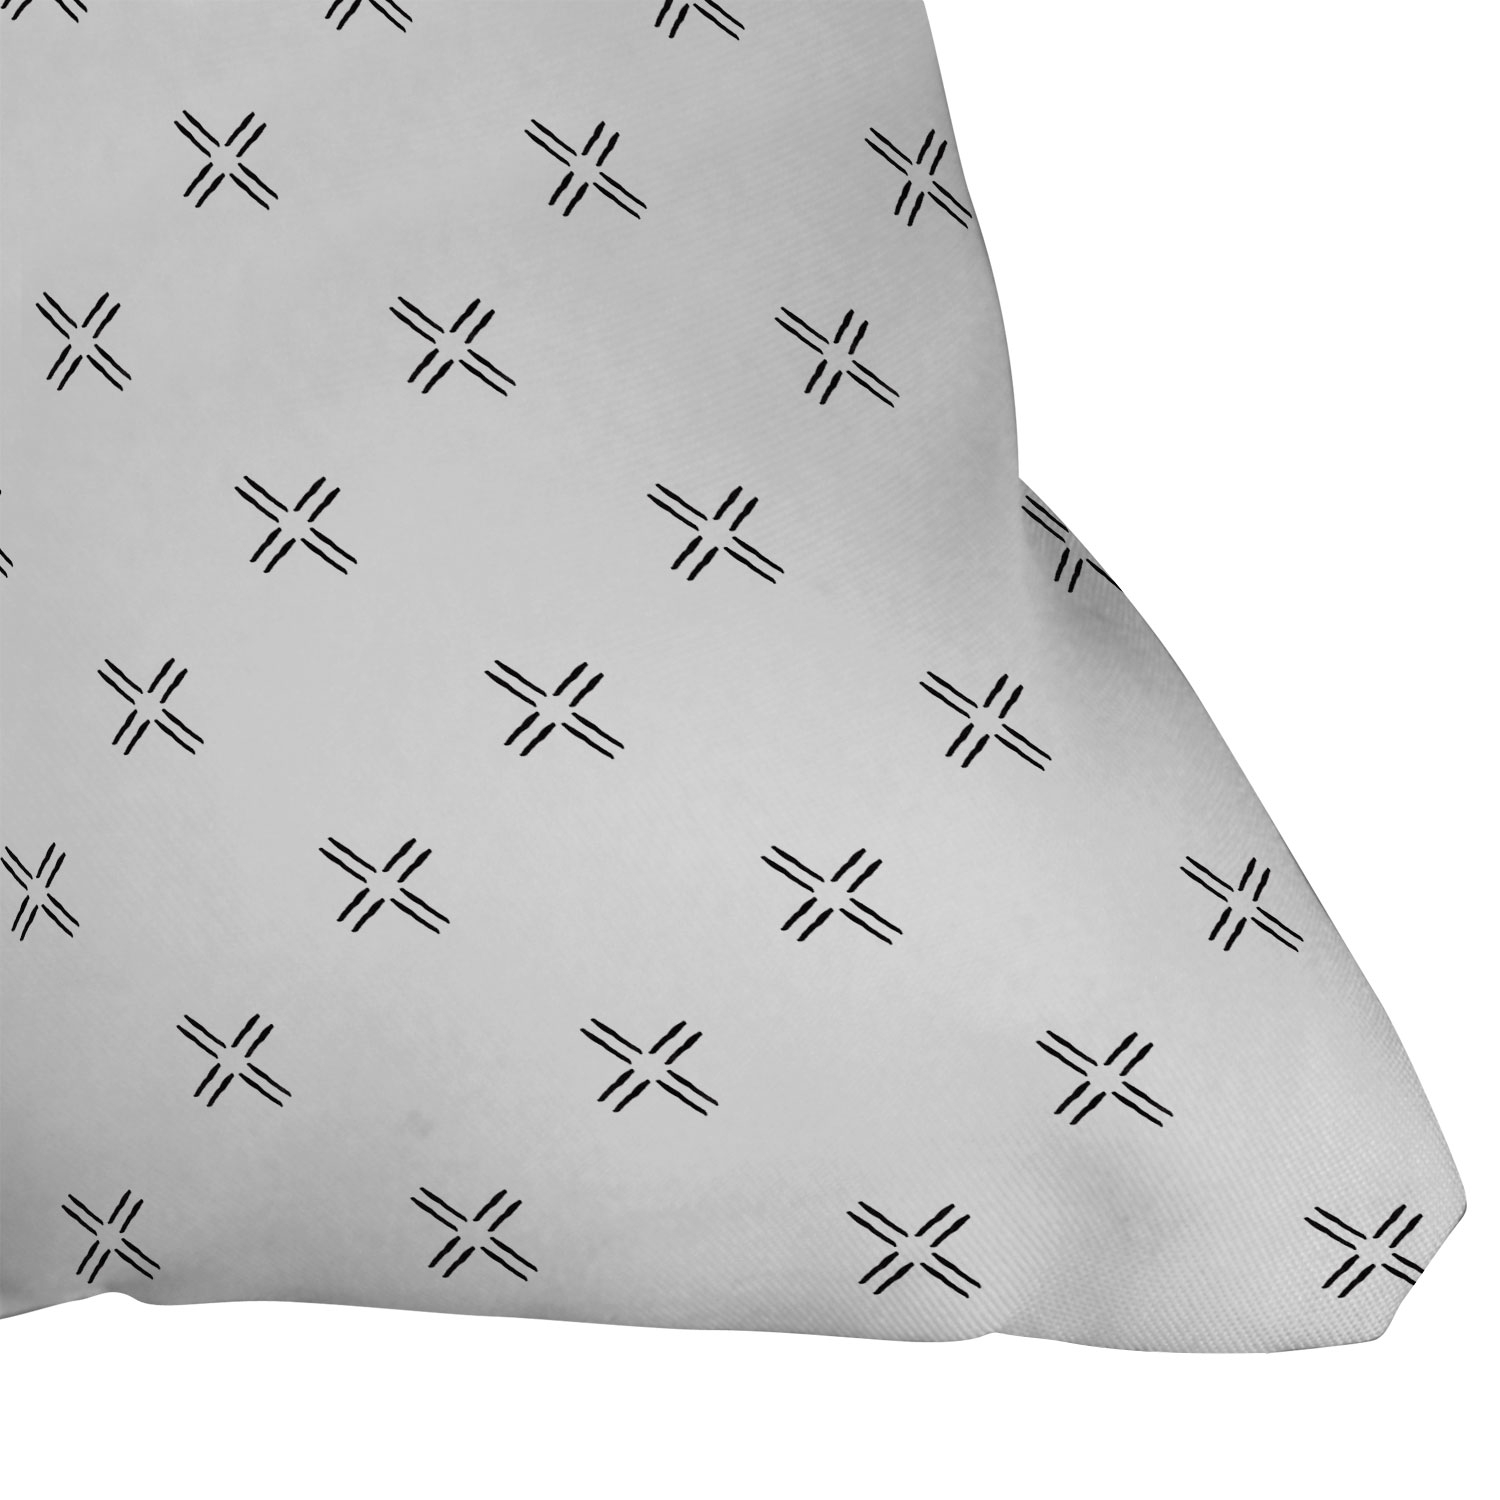 Mud Cloth Cross Black by Little Arrow Design Co - Outdoor Throw Pillow 20" x 20" - Image 2